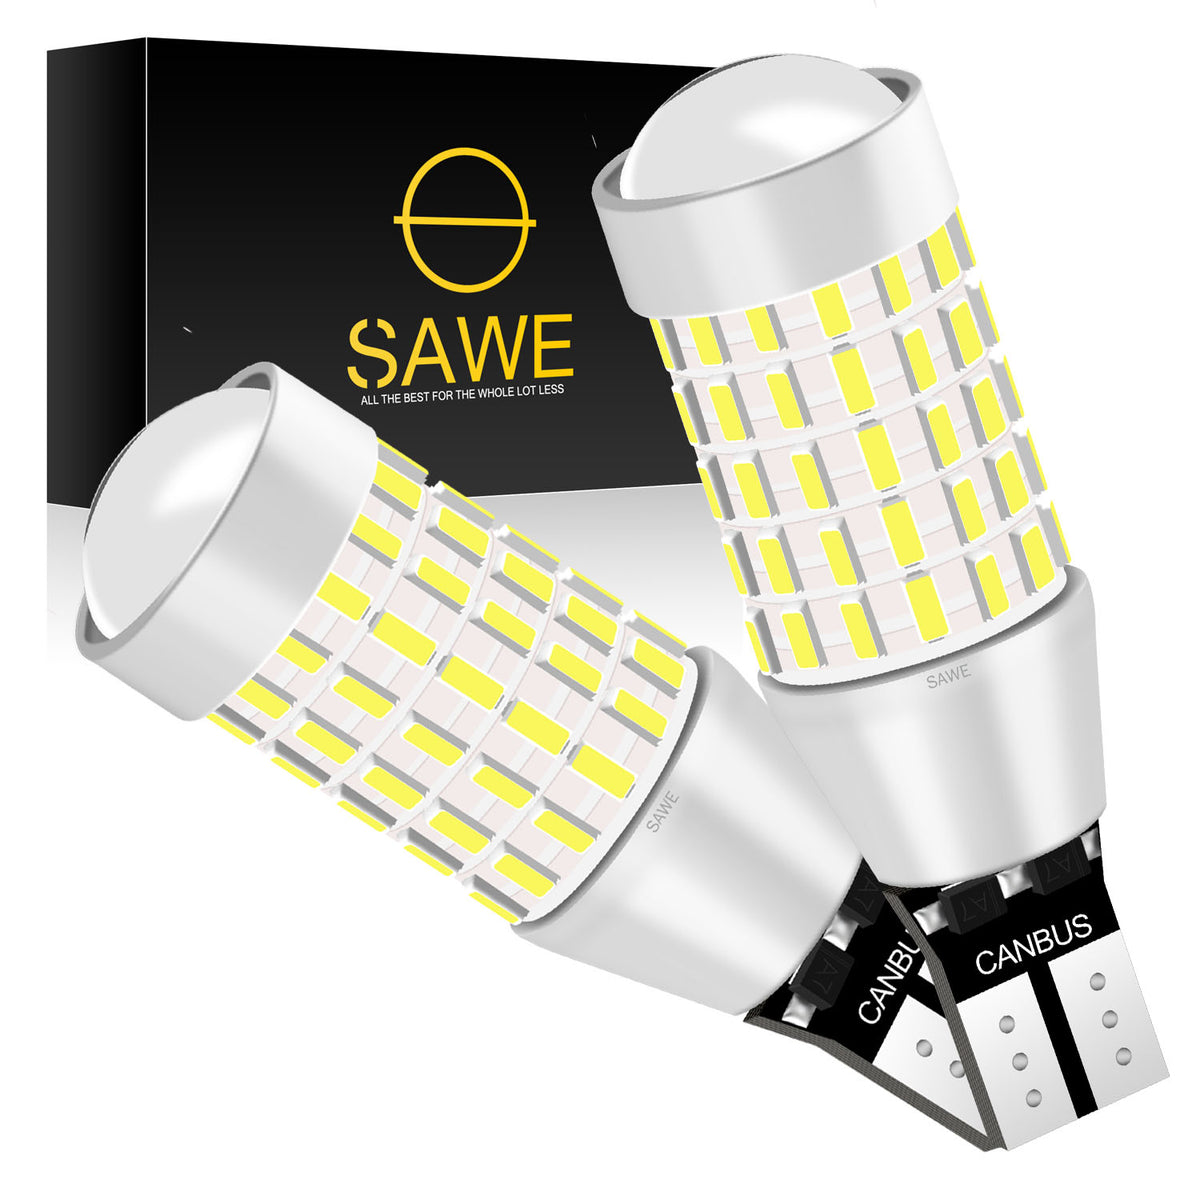 SAWE ® 921 912 T15 W16W 906 LED Bulbs for Back Up Reverse Lights 3014 87smd Canbus Error Free - 6000K White